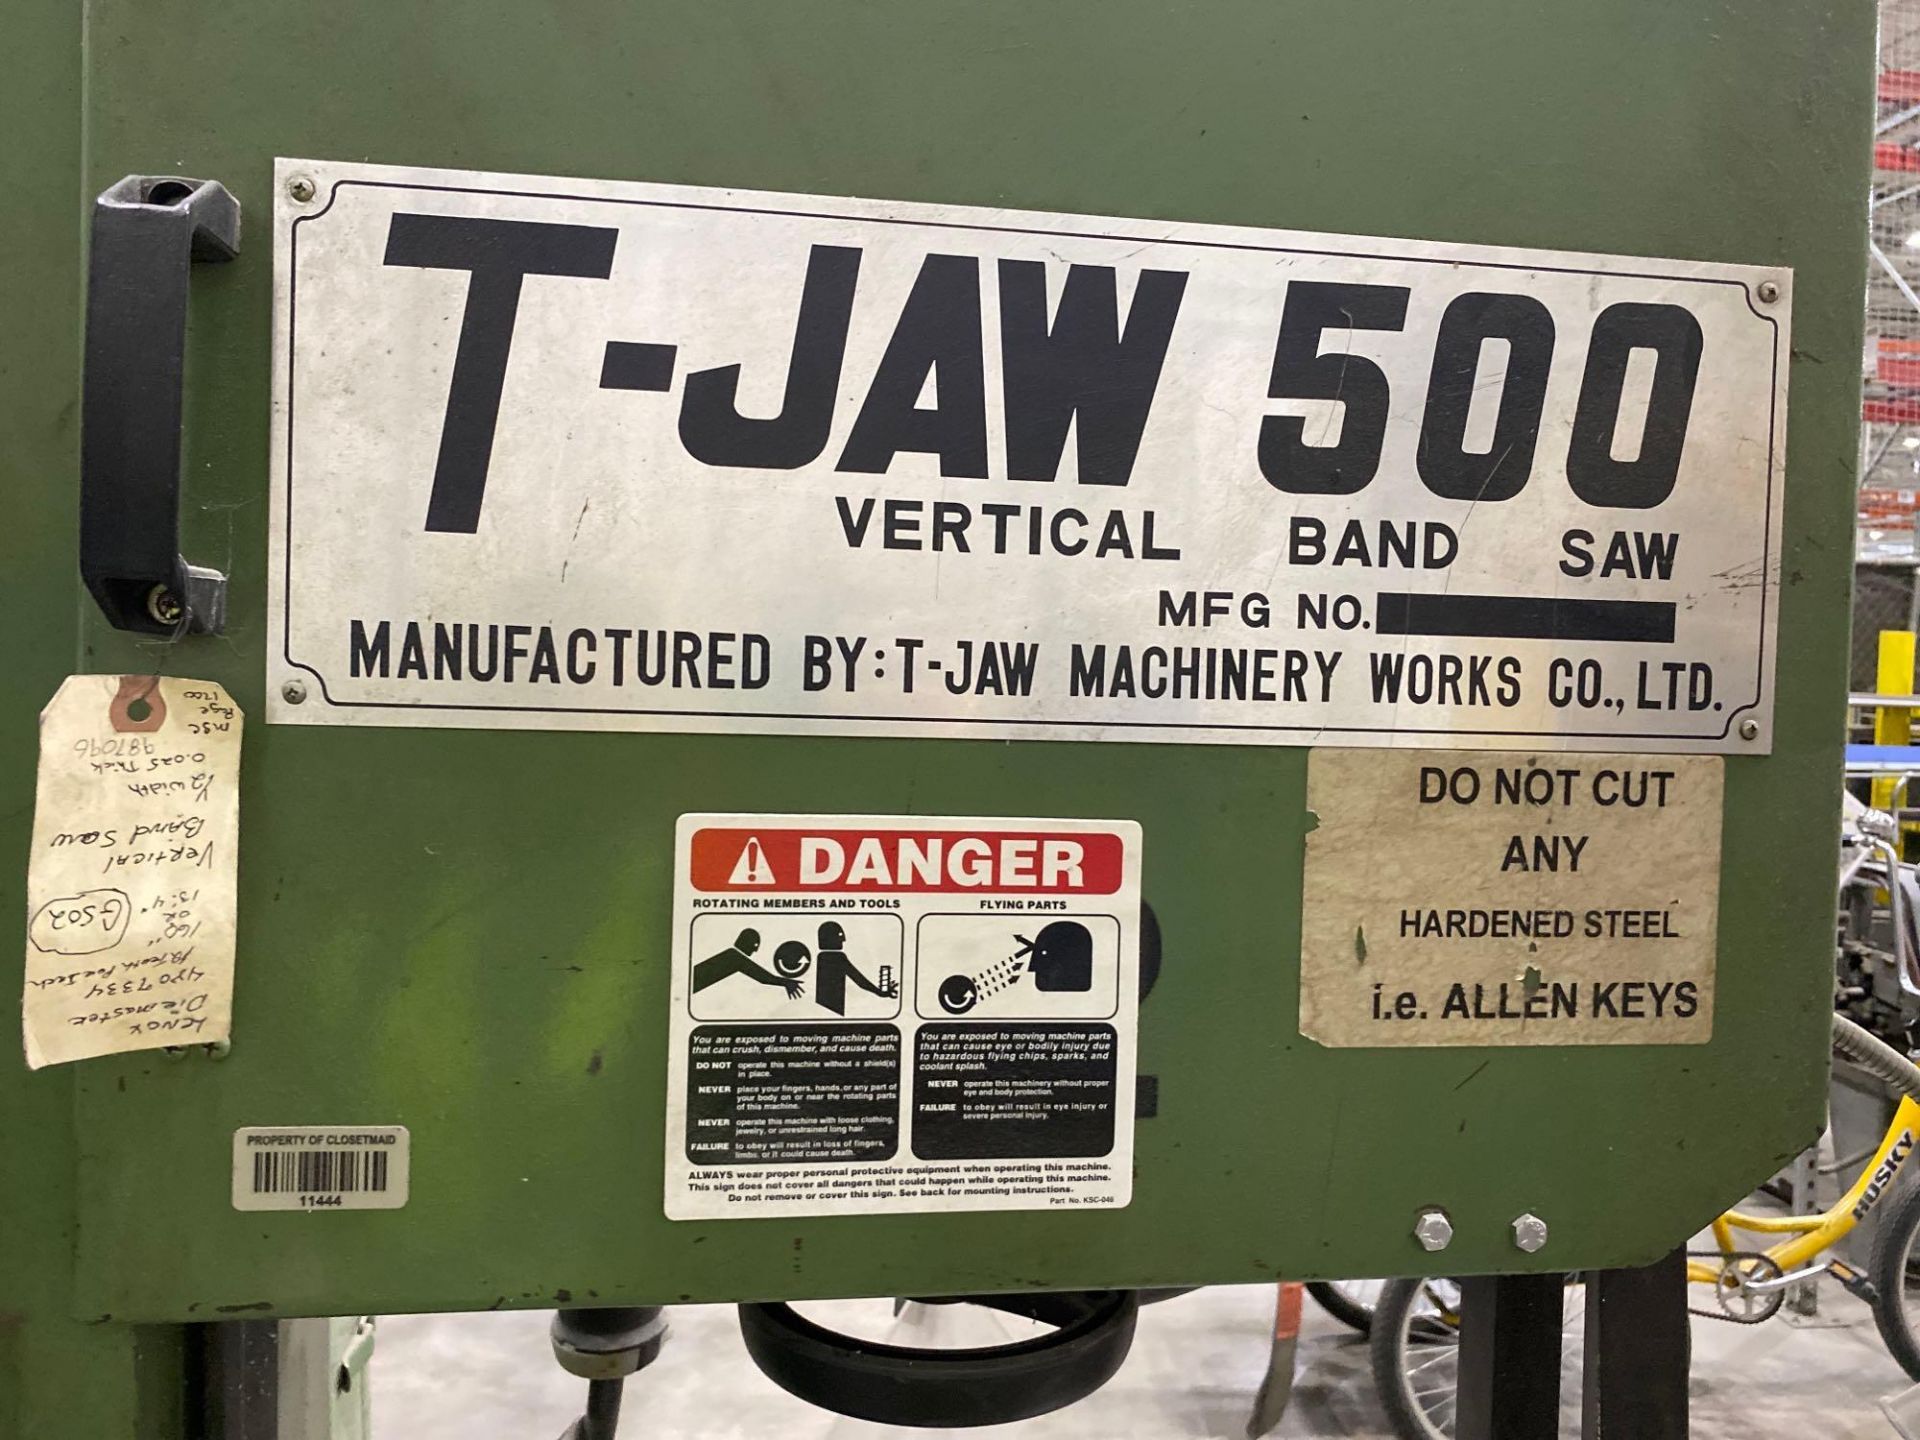 T-Jaw 500 Vertical Band Saw - Image 2 of 4